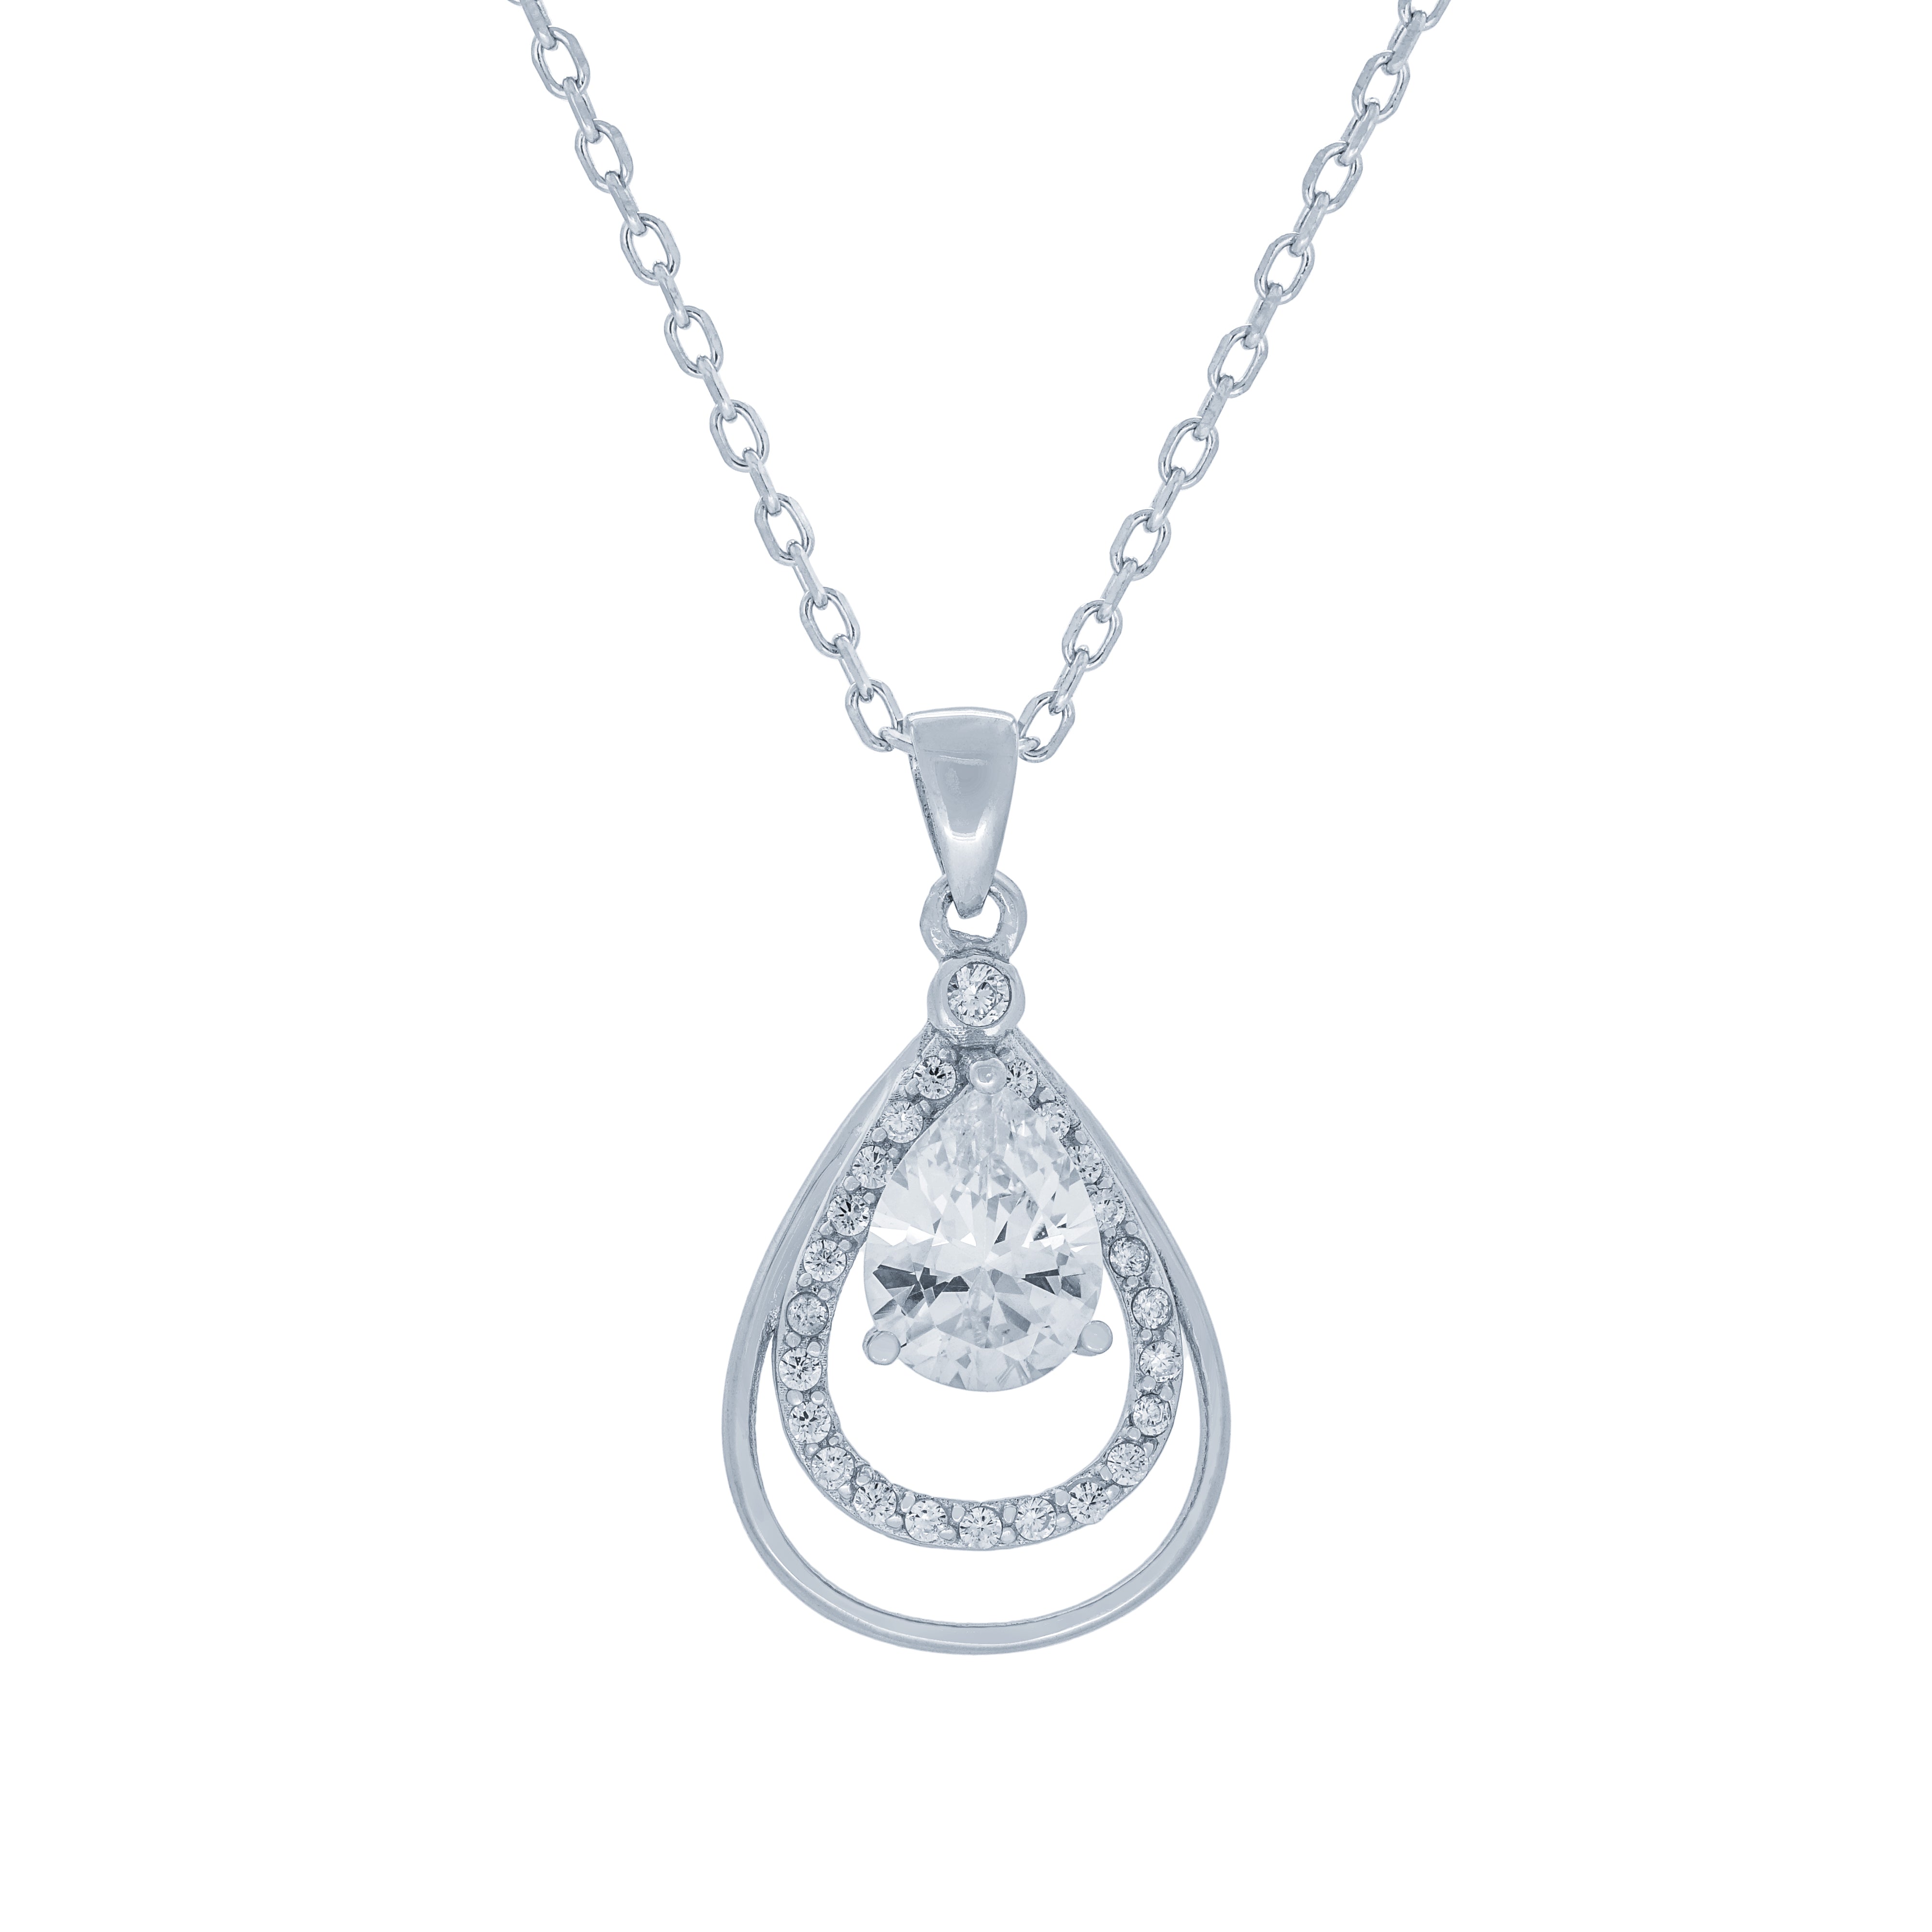 (100148) White Cubic Zirconia Drop Pendant Necklace In Sterling Silver